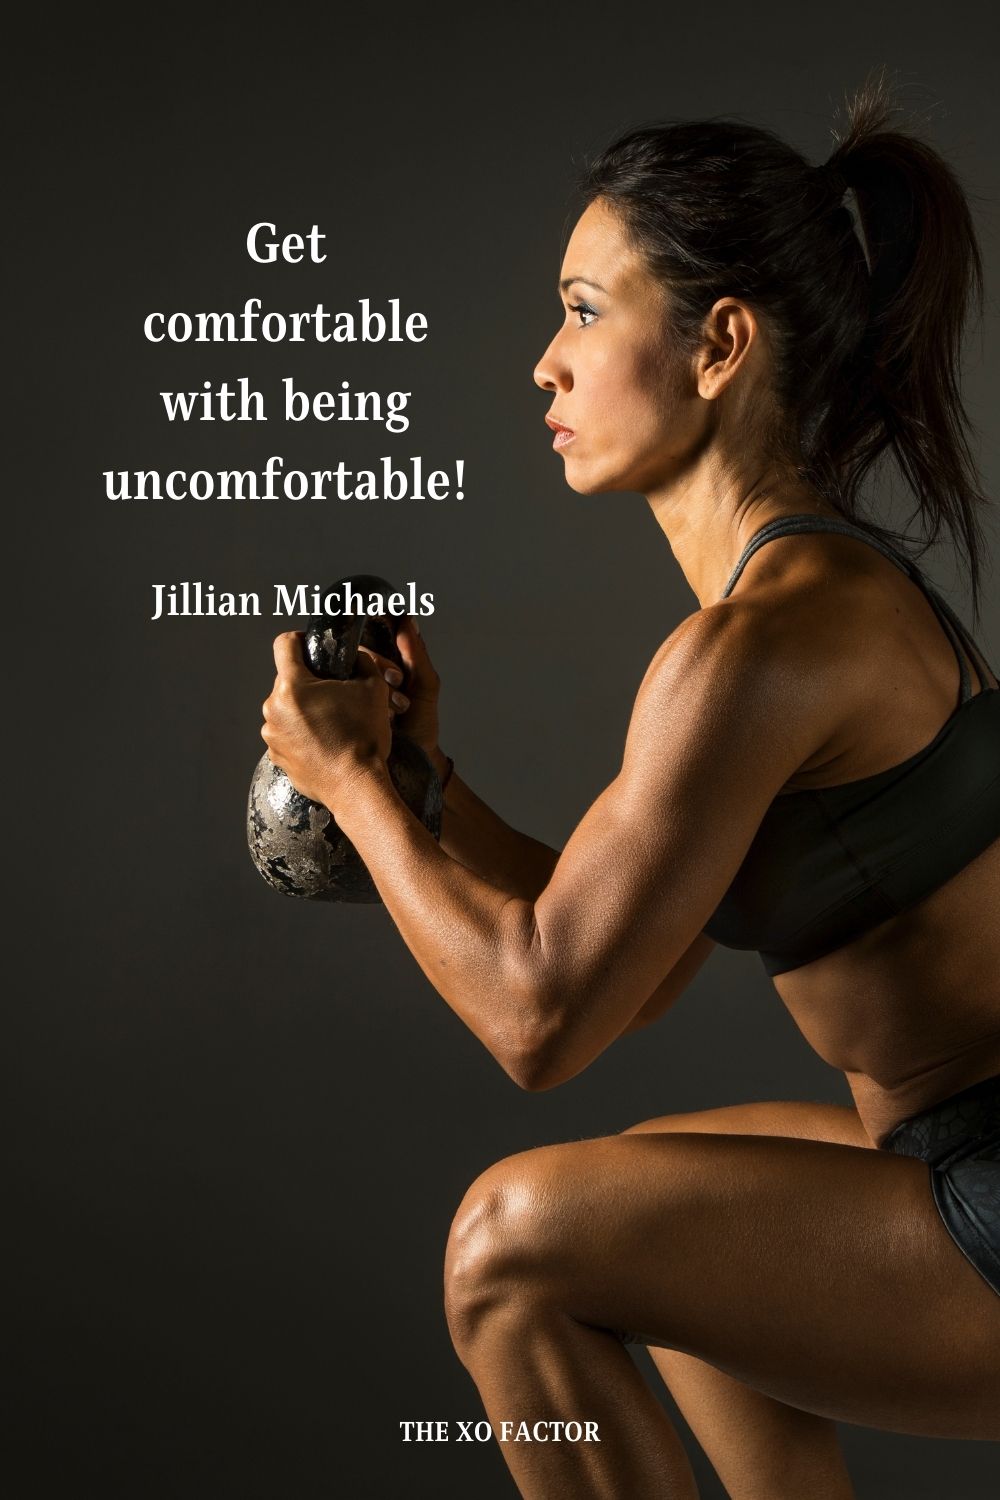 Get comfortable with being uncomfortable! Jillian Michaels